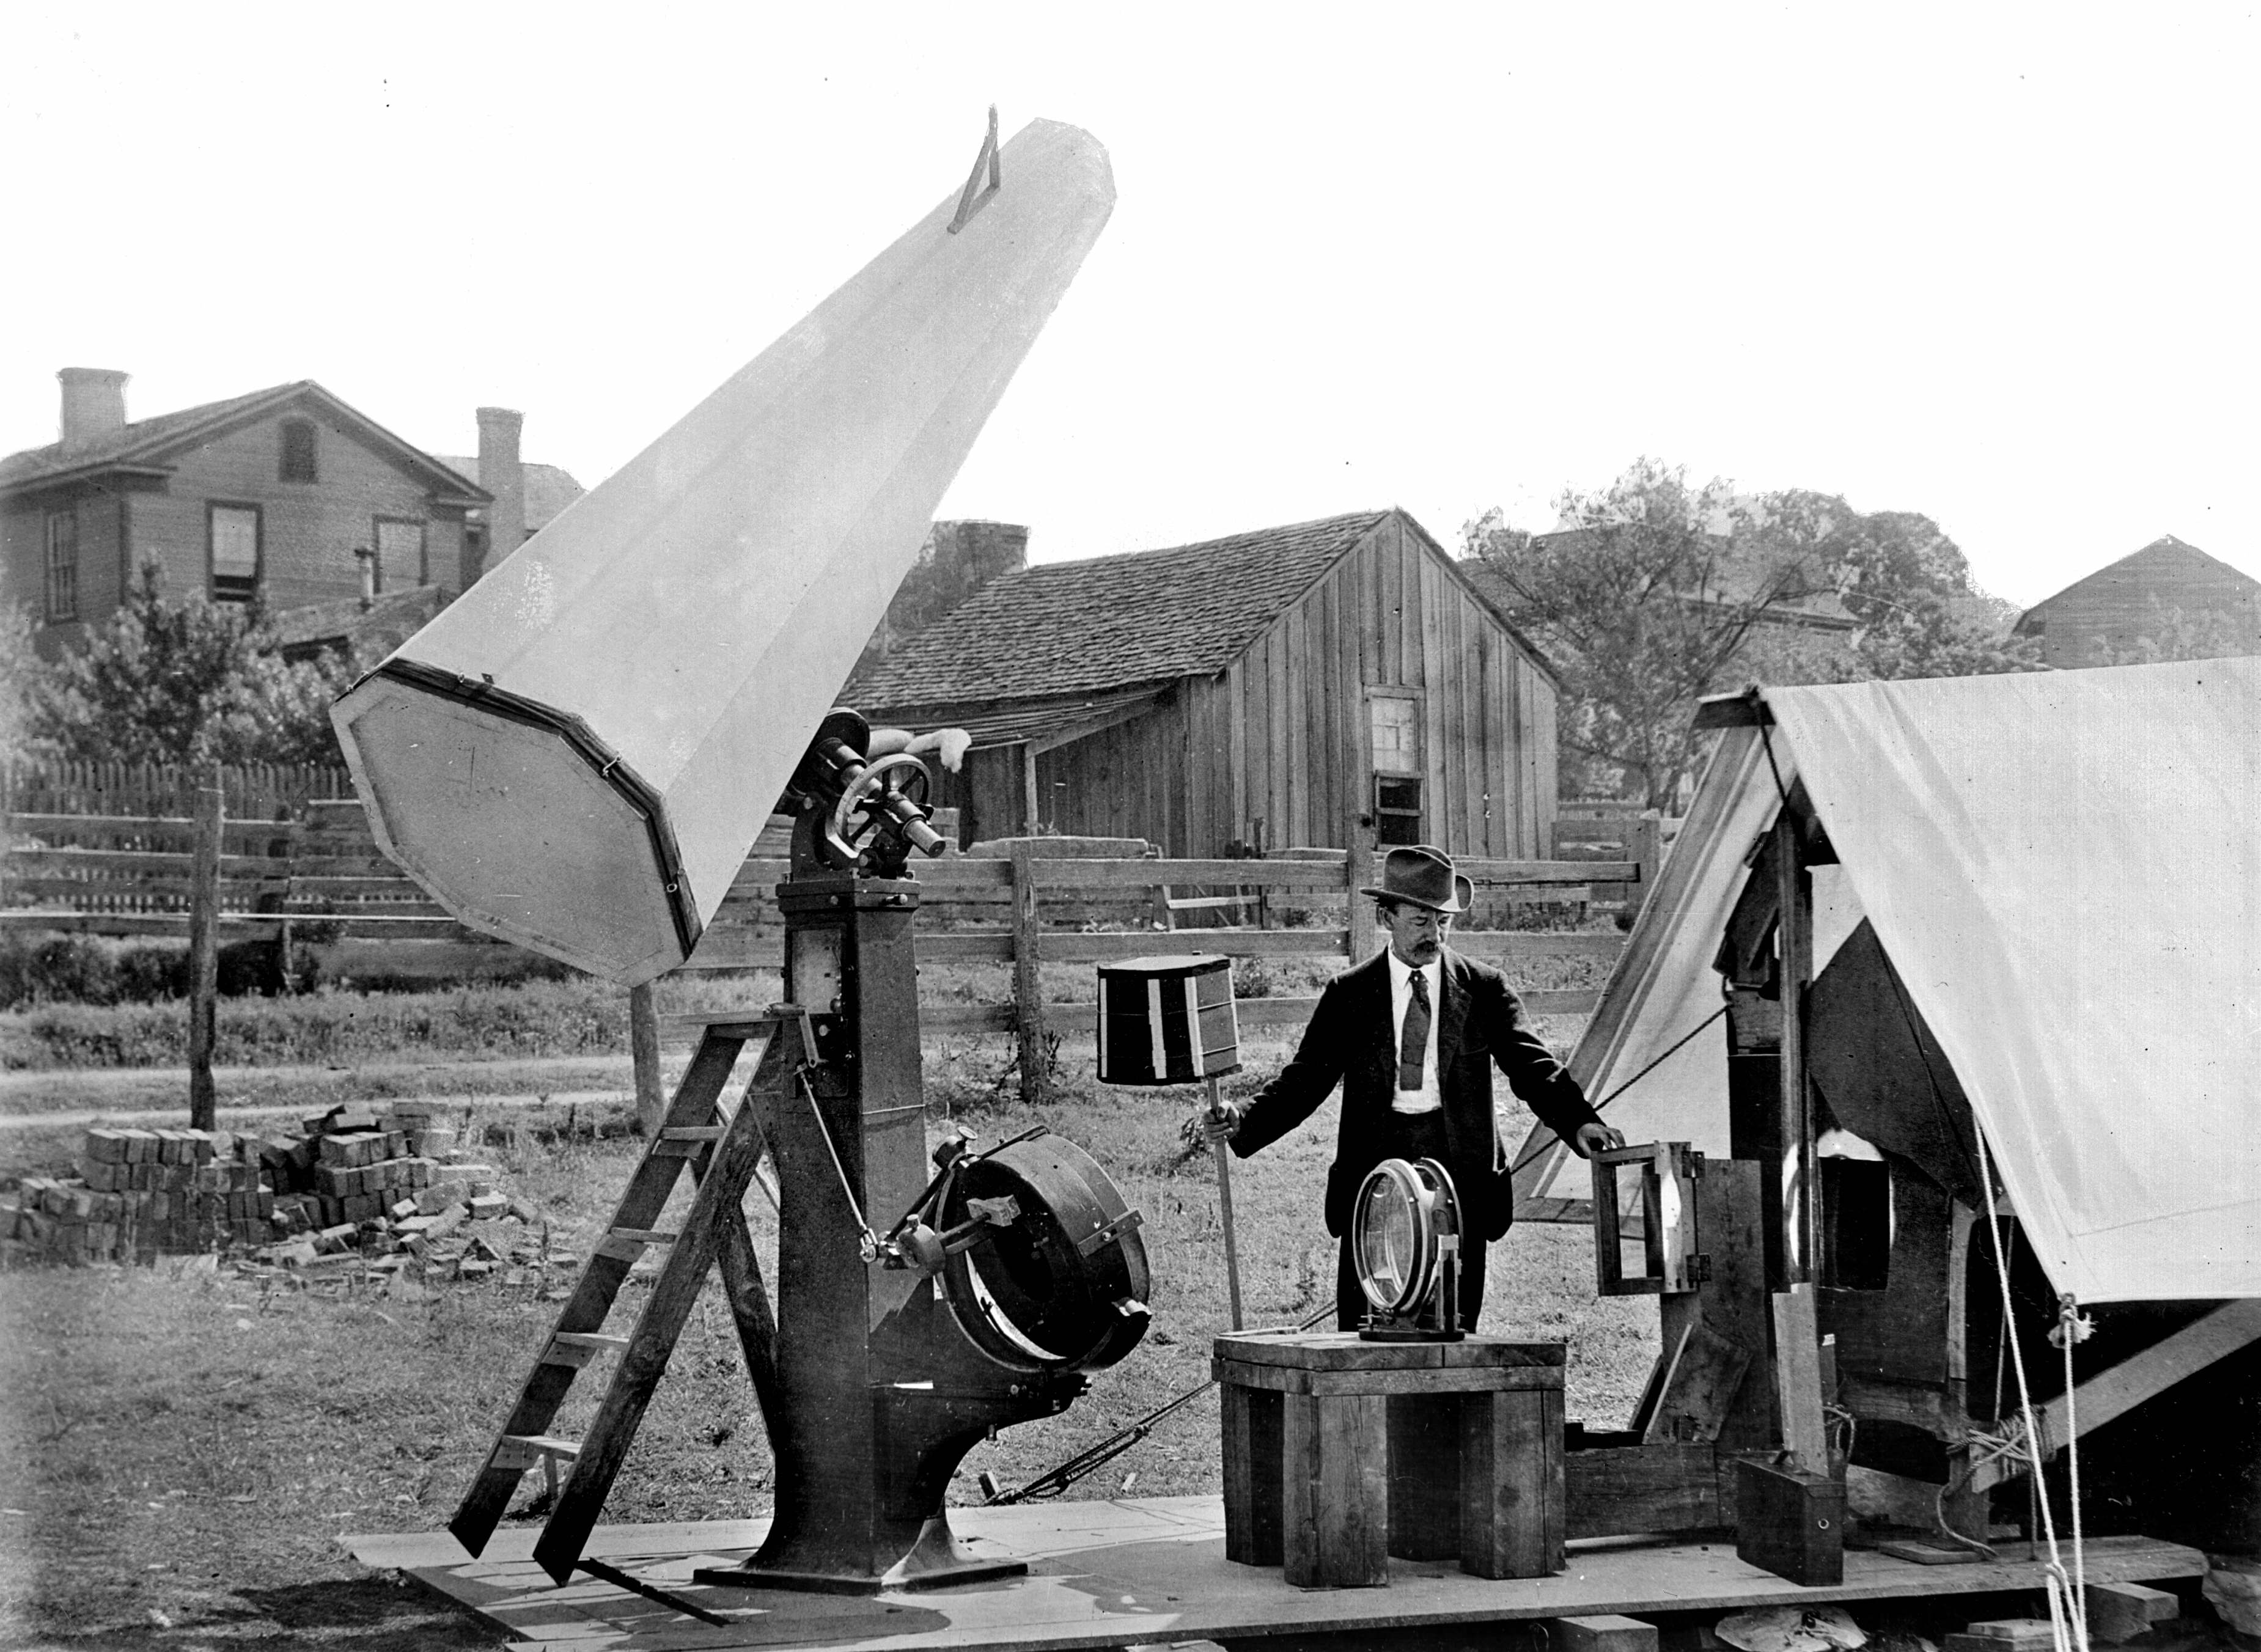 A man stands next to a large telescope and a shelter tent which housed a photographic room. He is wearing a suit and hat.